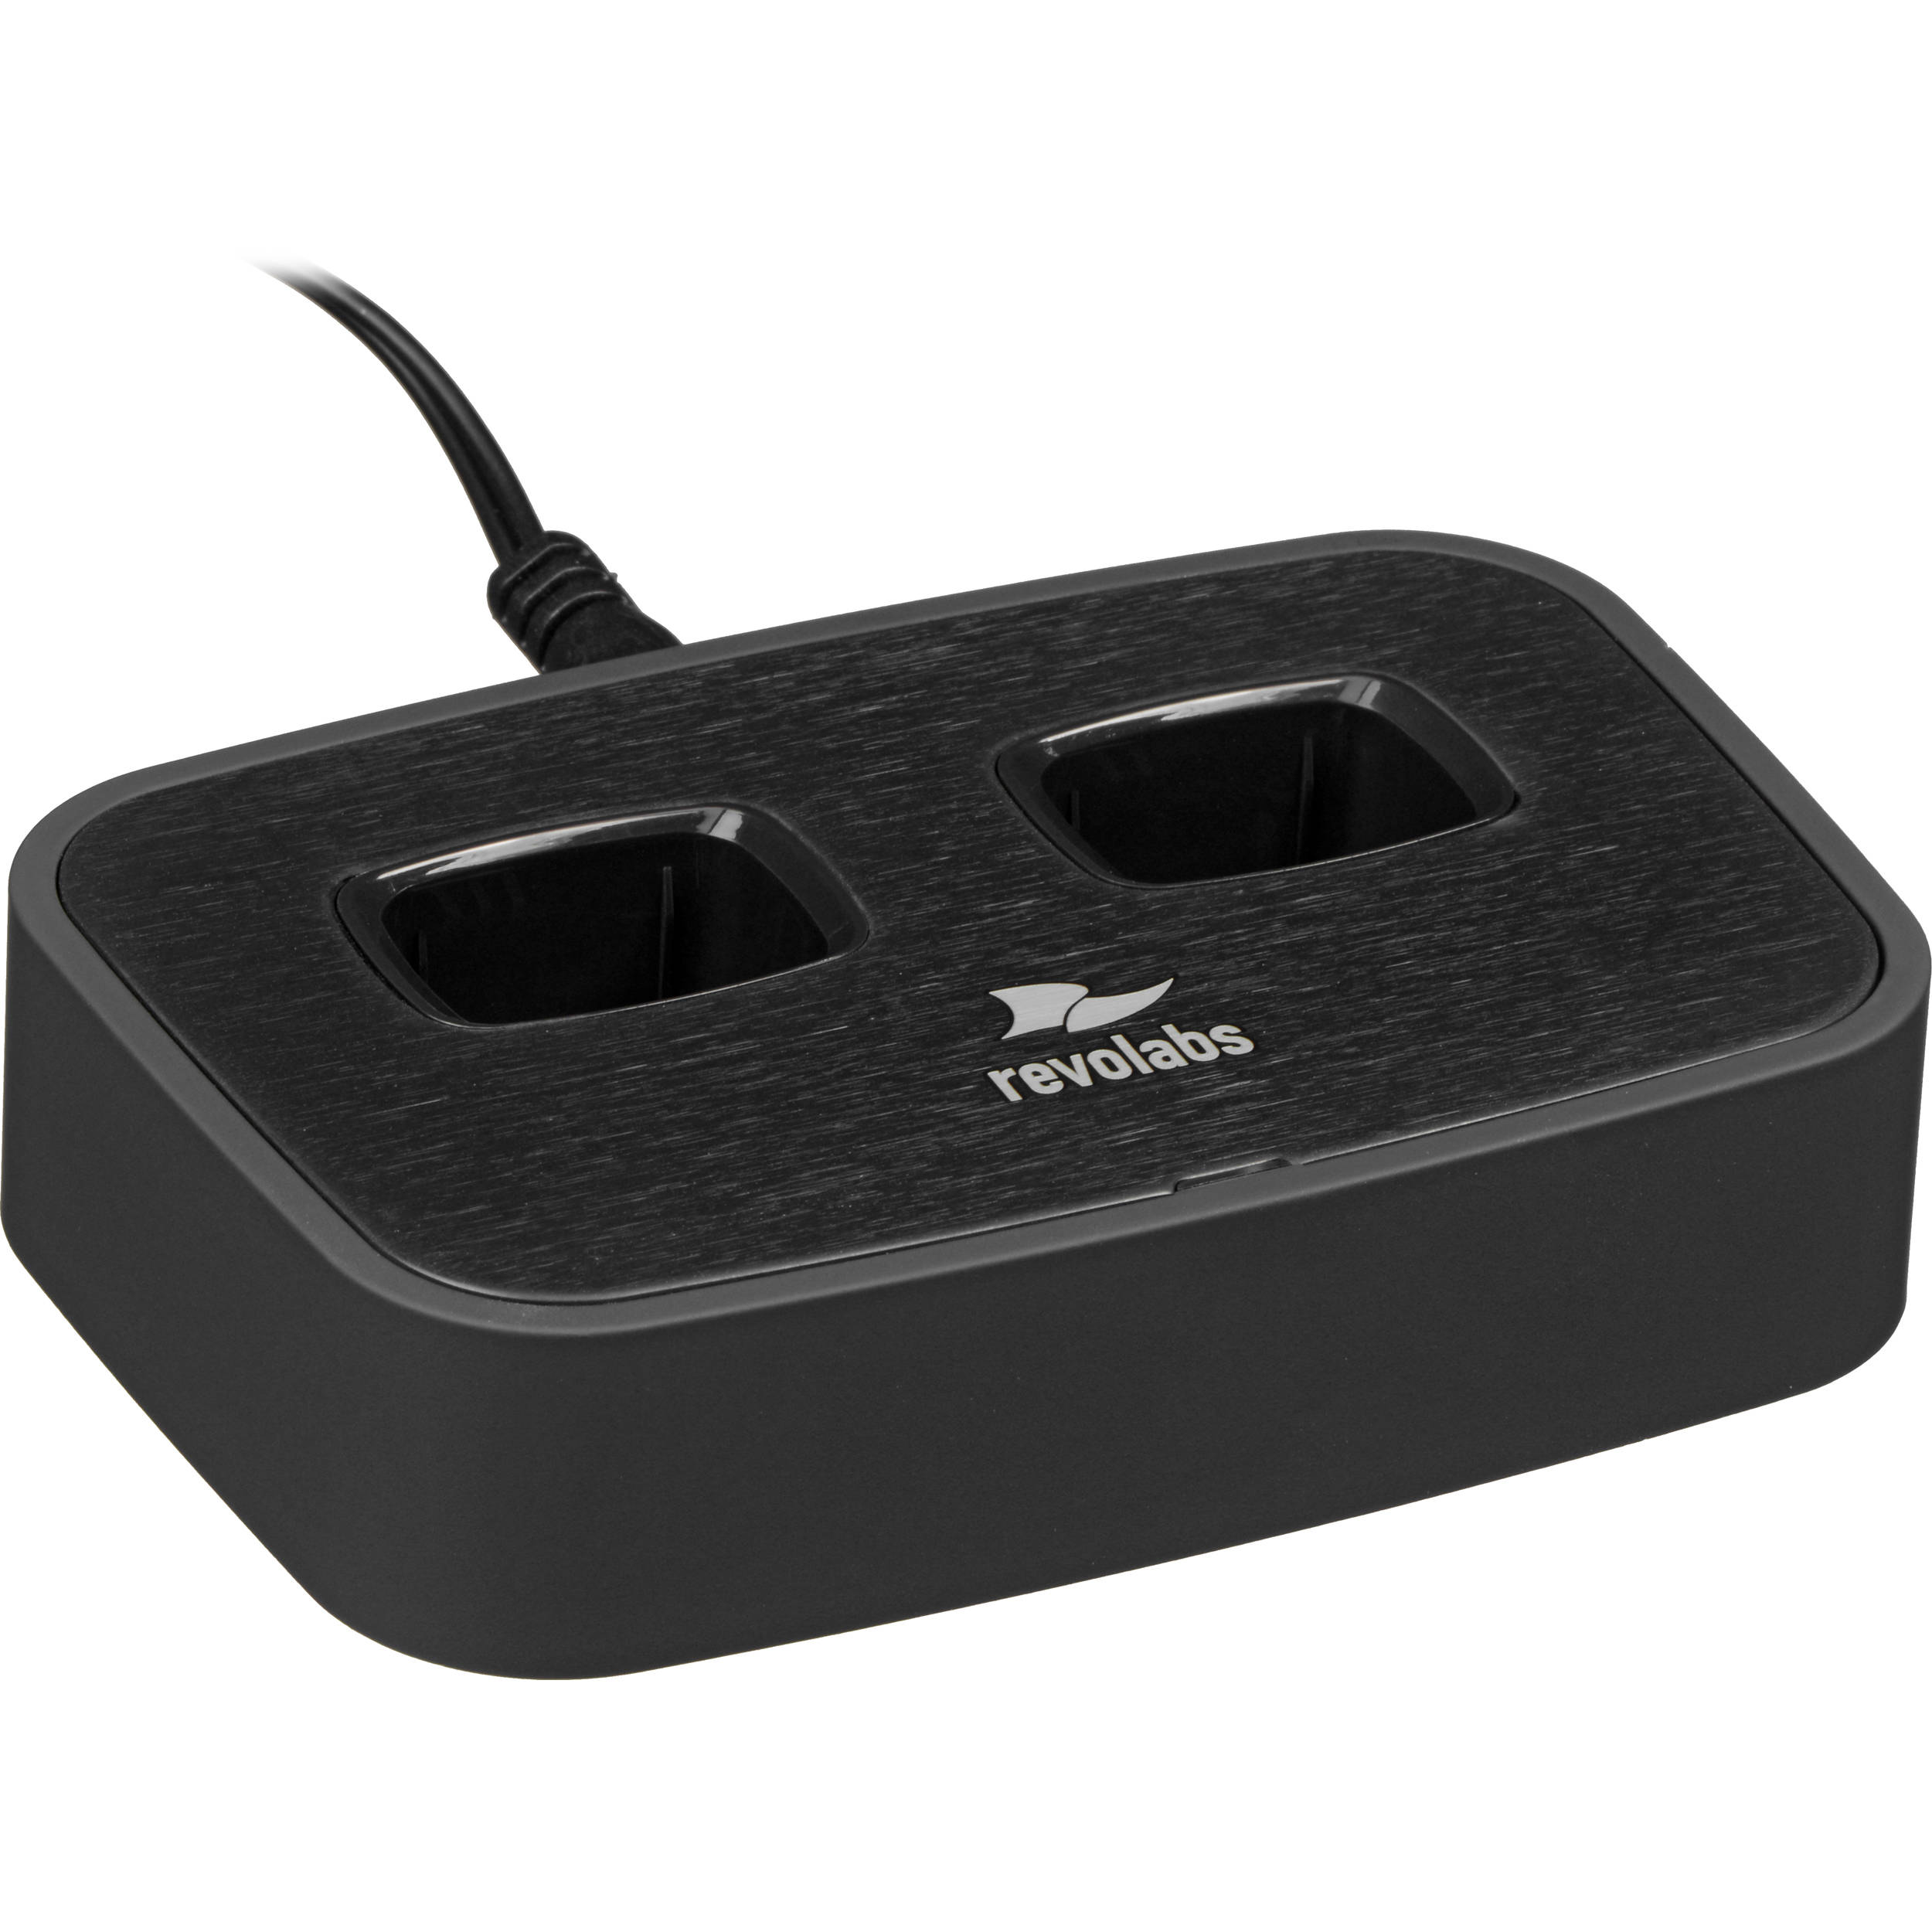 Revolabs Charger Base for HD D